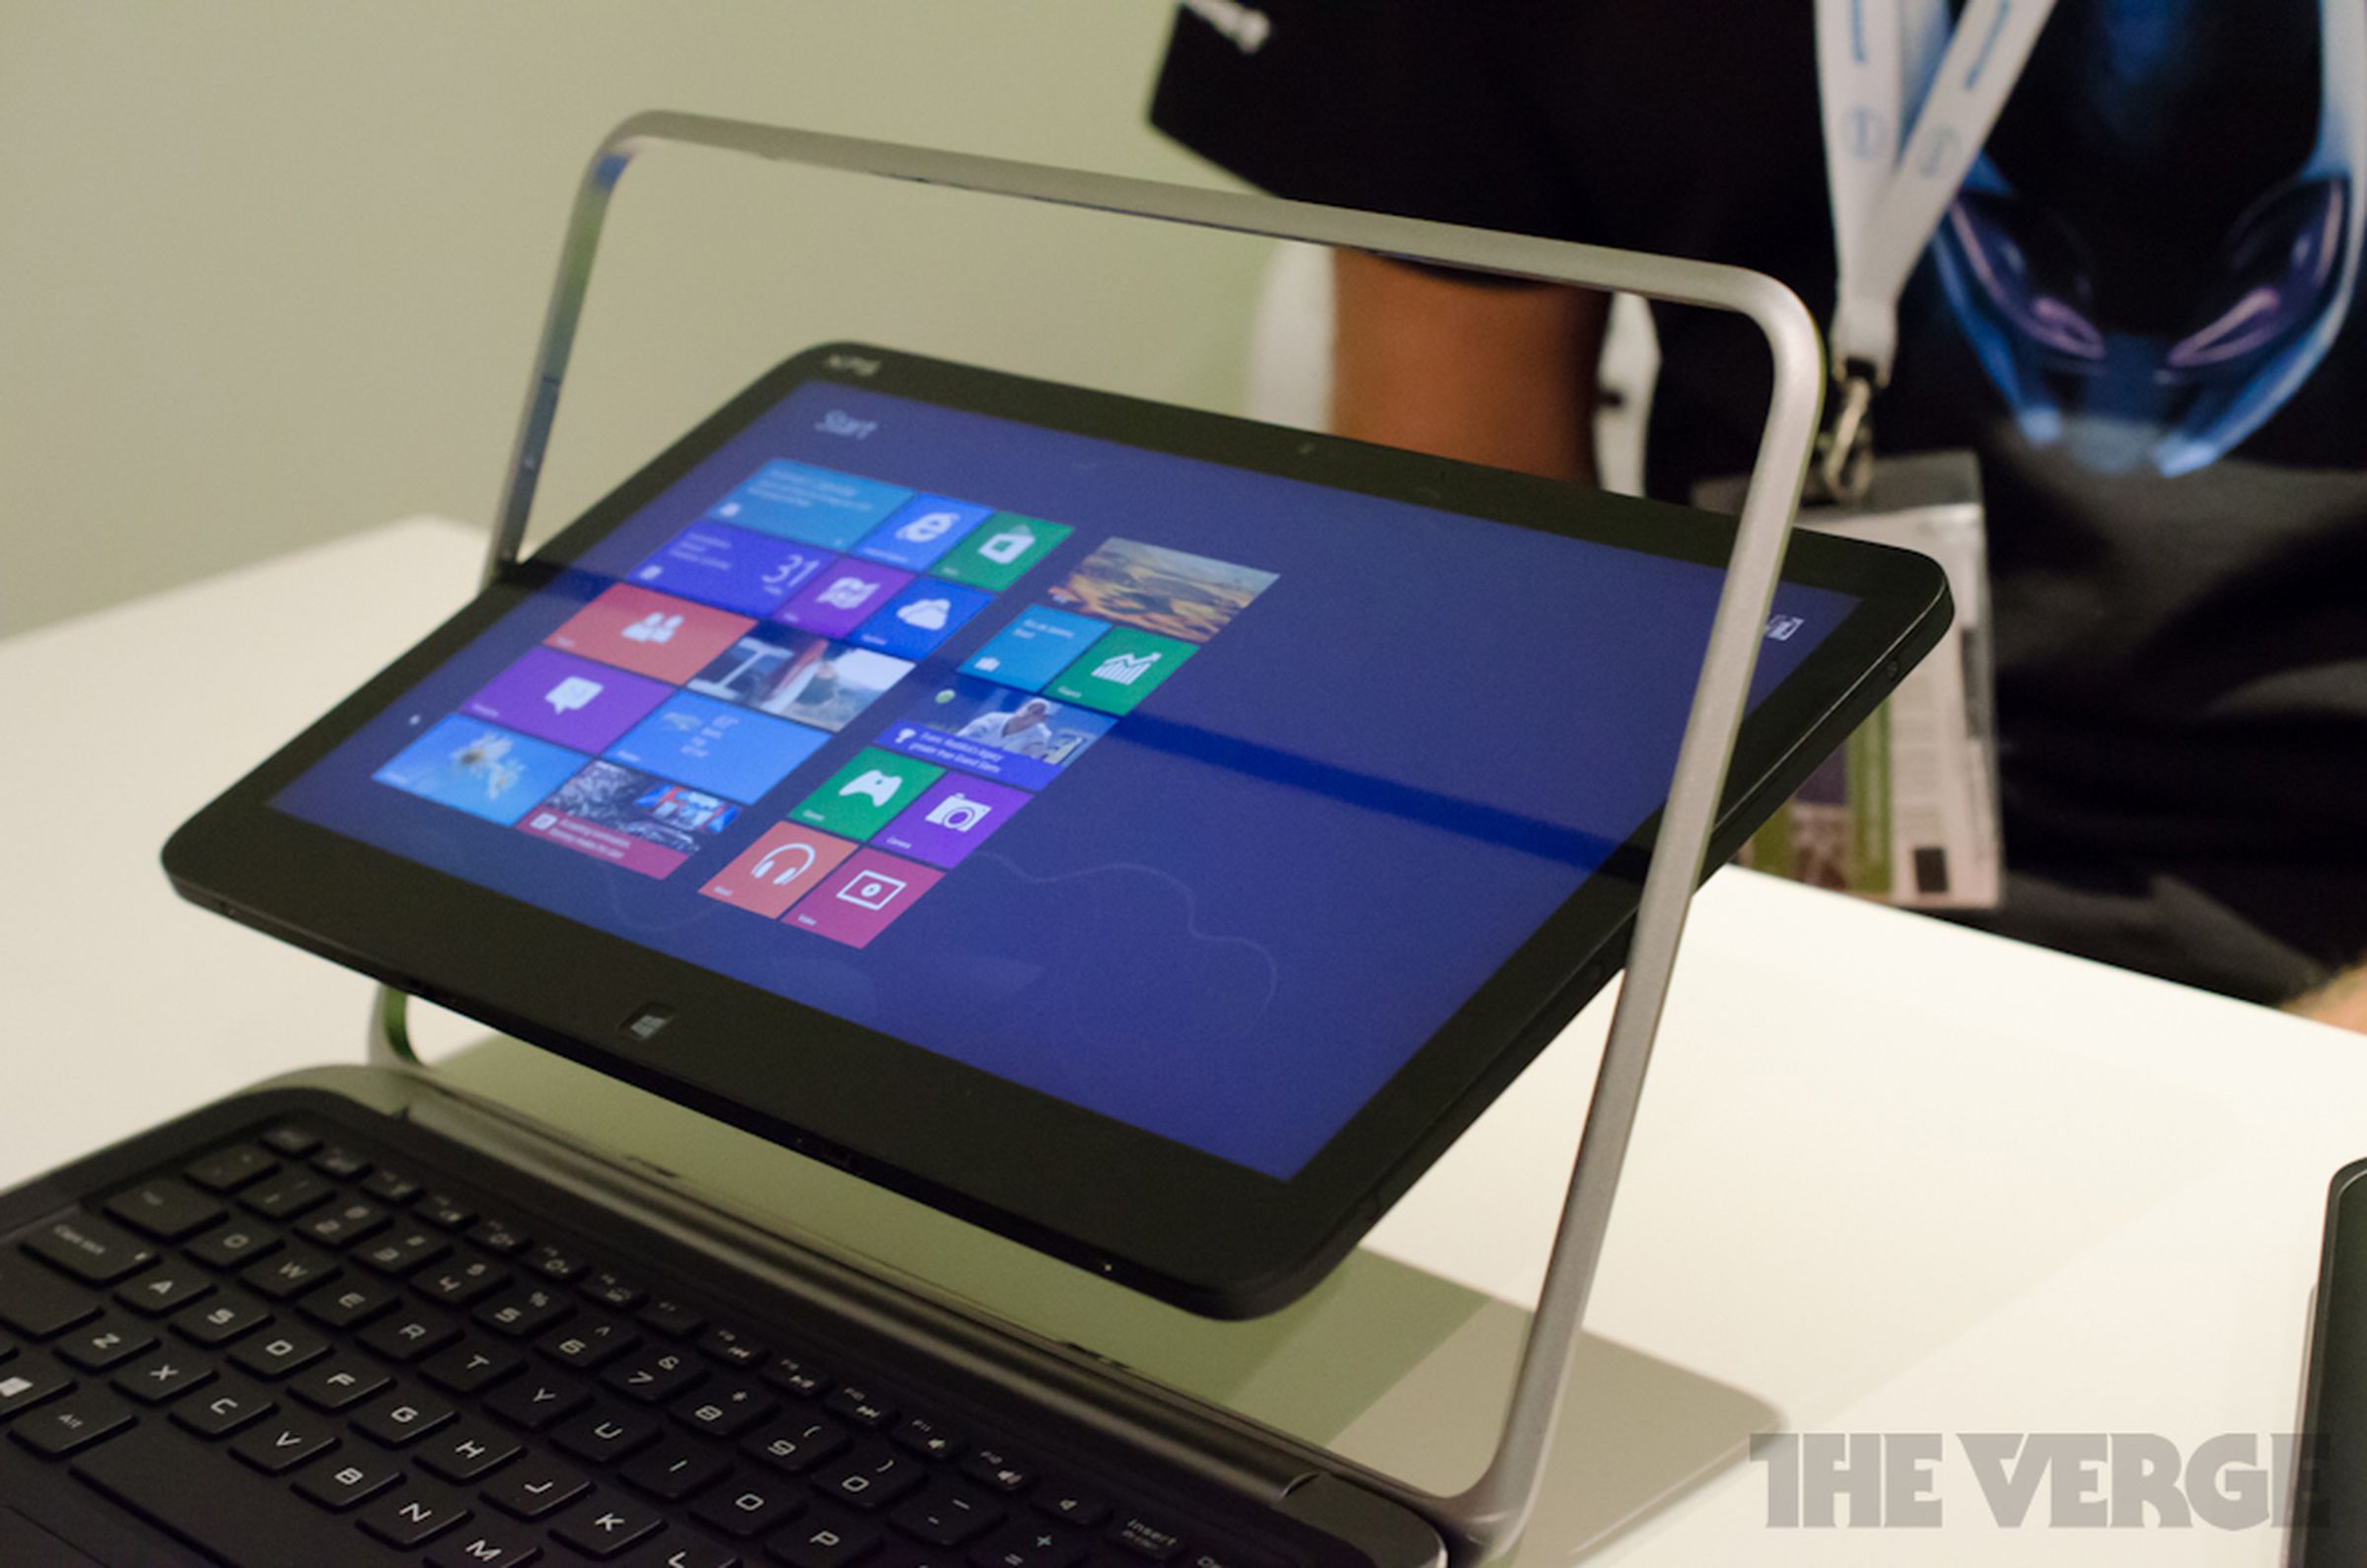 Dell XPS Duo 12 hands-on pictures